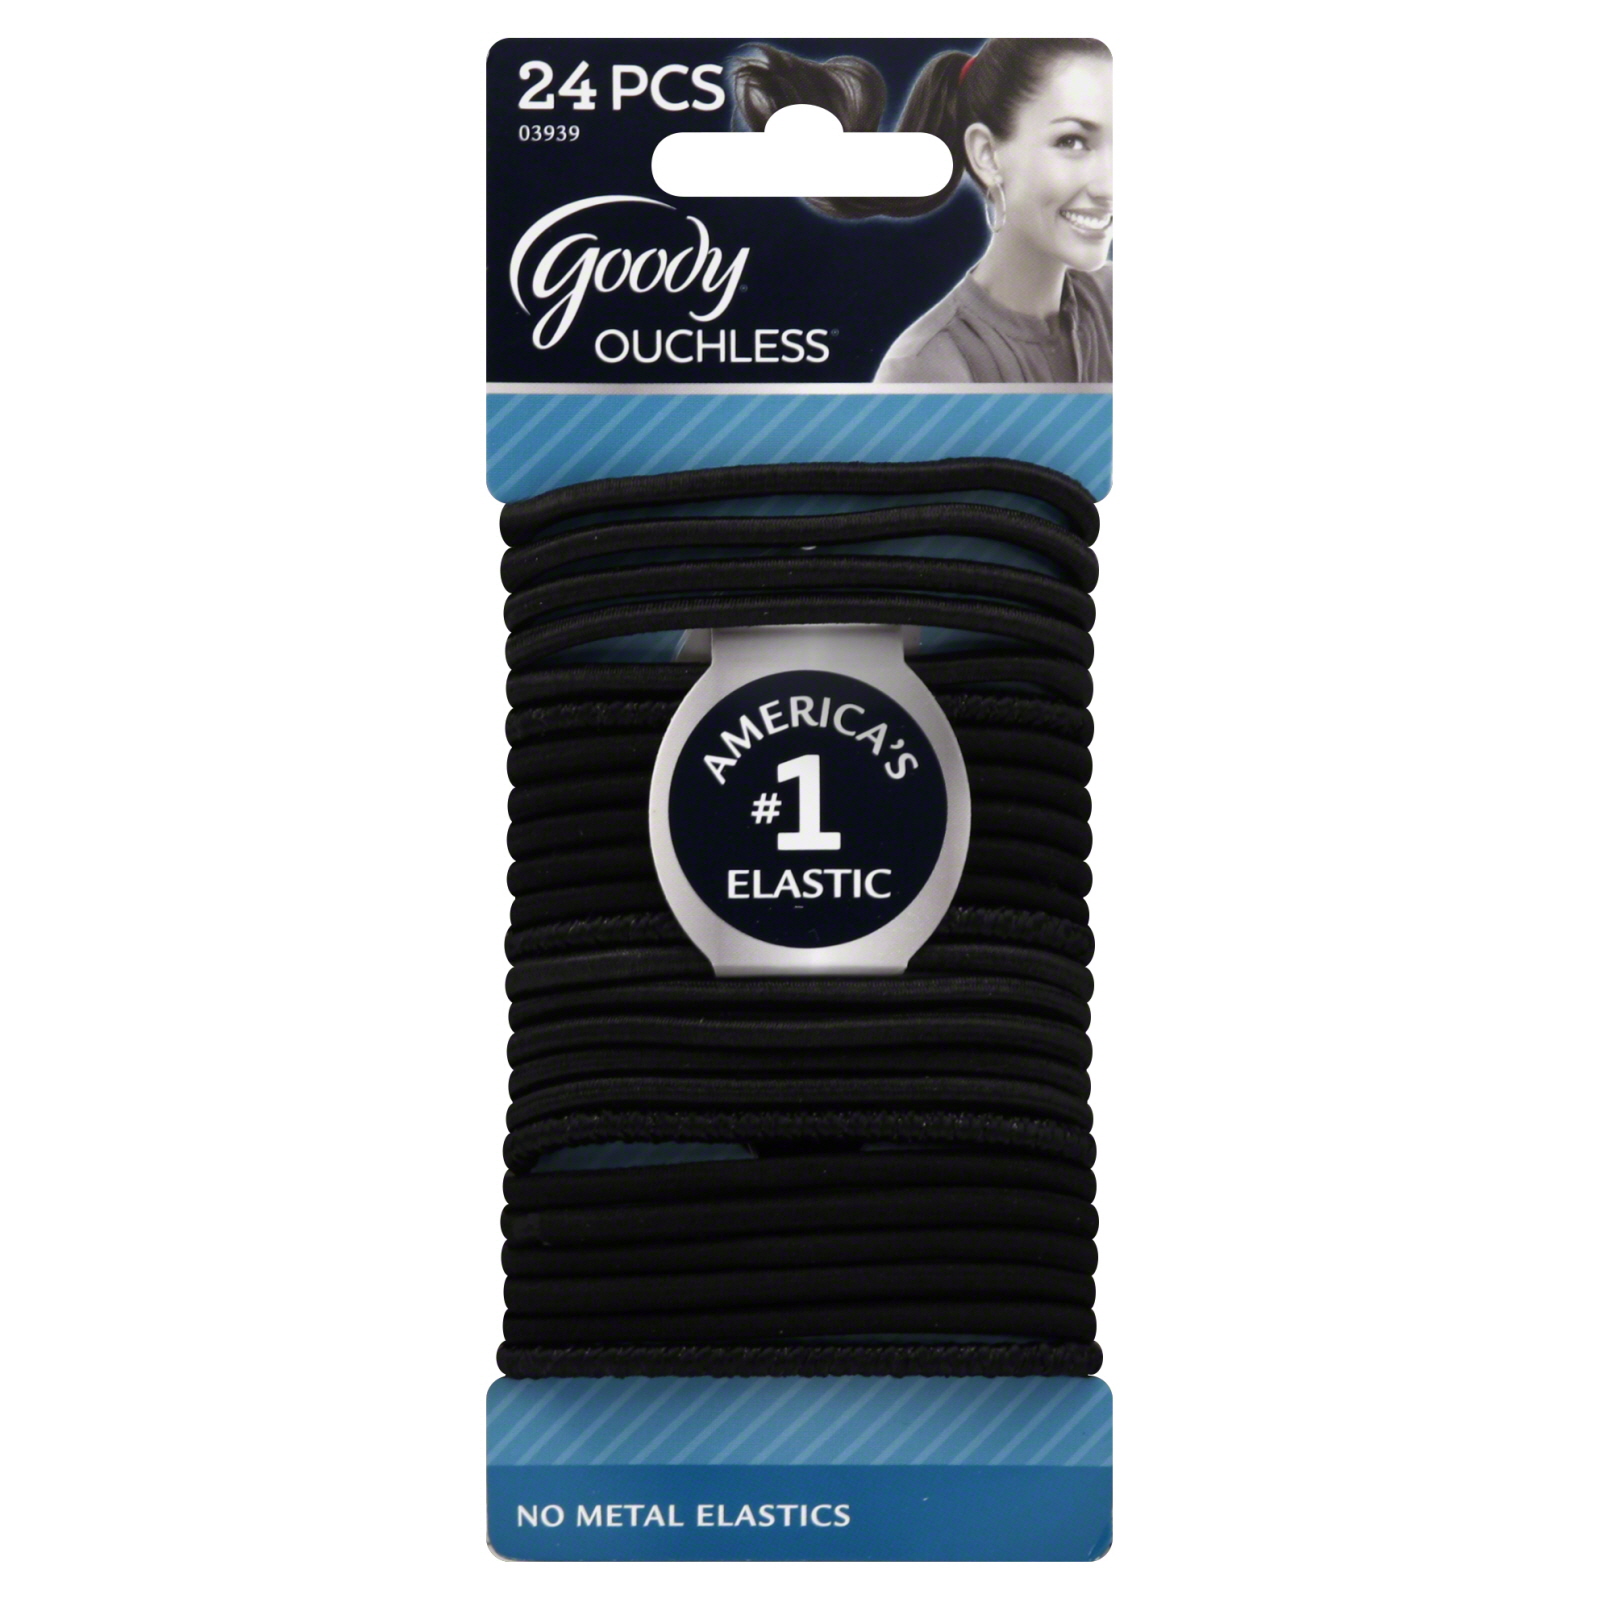 Goody Ouchless 4MM Elastics, Black on Black, 24 CT